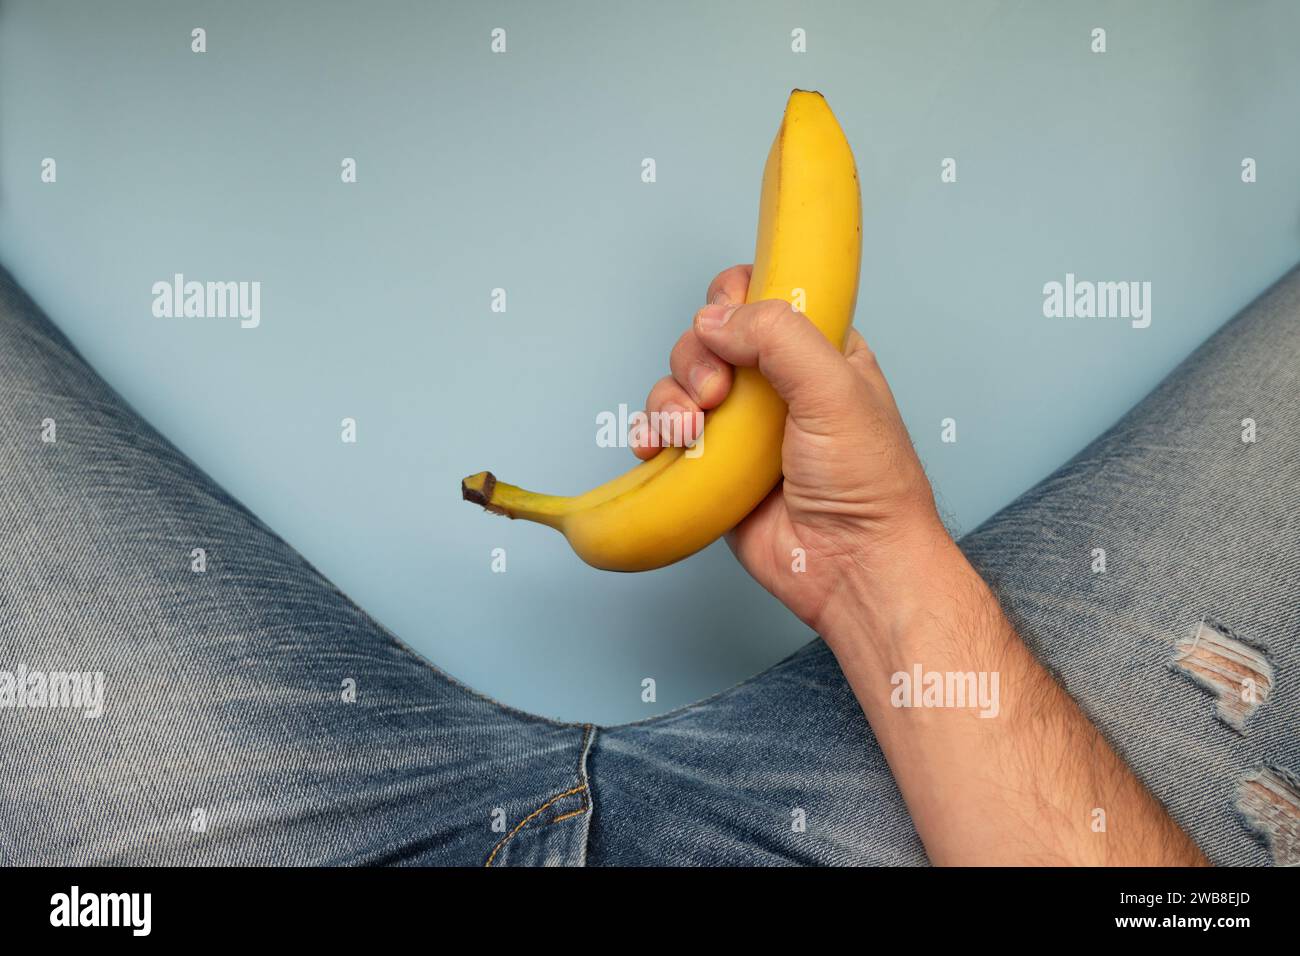 A yellow big banana and men's legs in jeans on a blue background. The concept of men's health Stock Photo